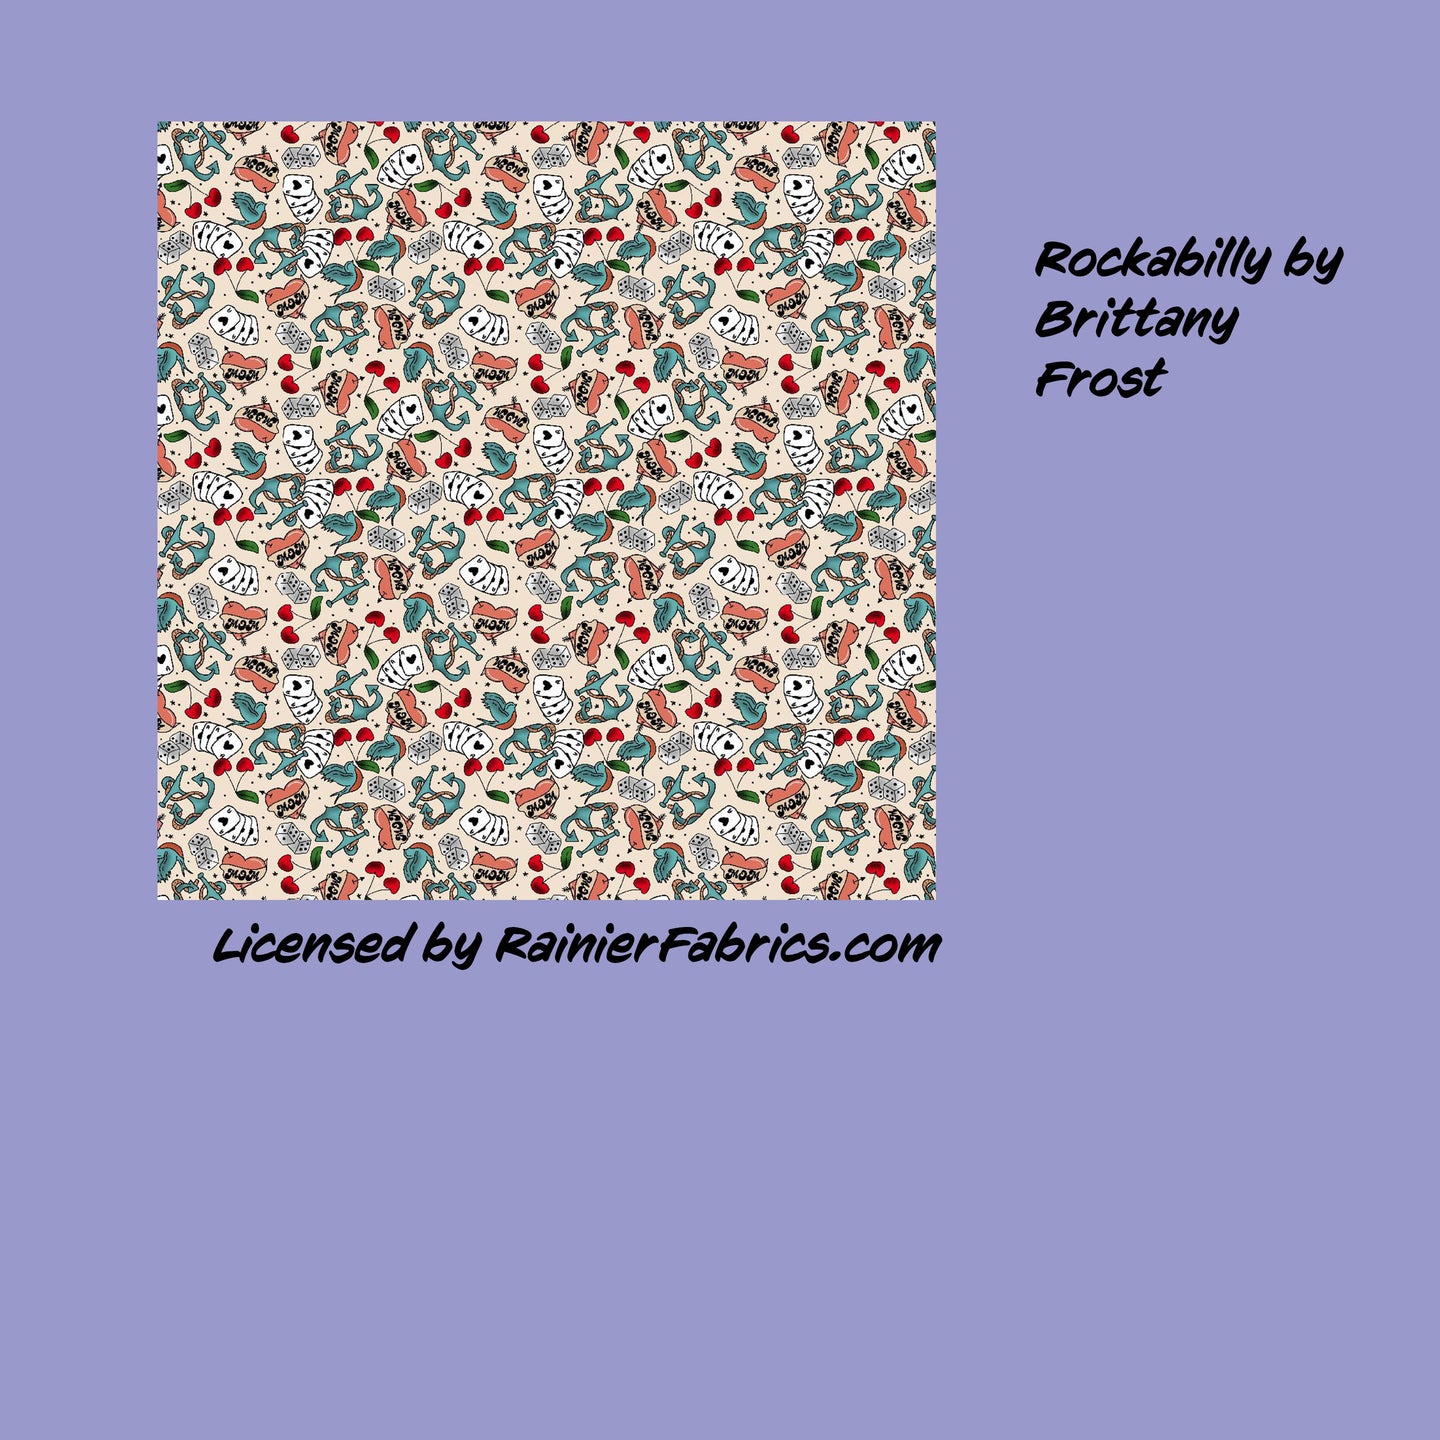 Rockabilly by Brittany Frost  - 2-5 day turnaround - Order by 1/2 yard; Description of bases below